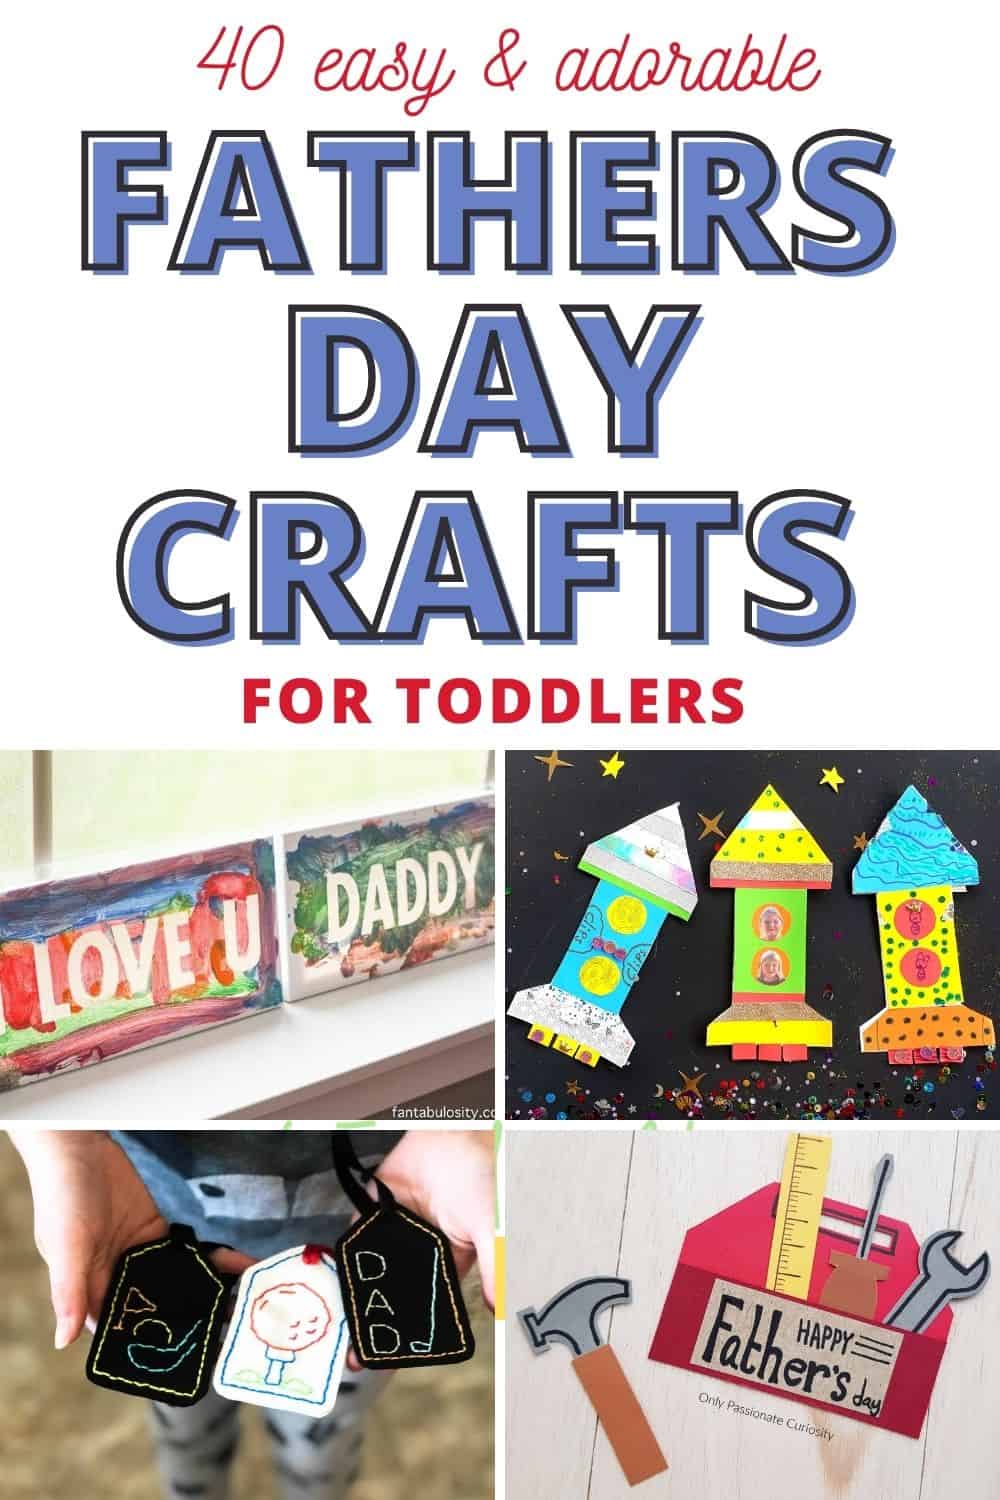 41 Easy Father’s Day crafts for toddlers (2 & 3 year olds)